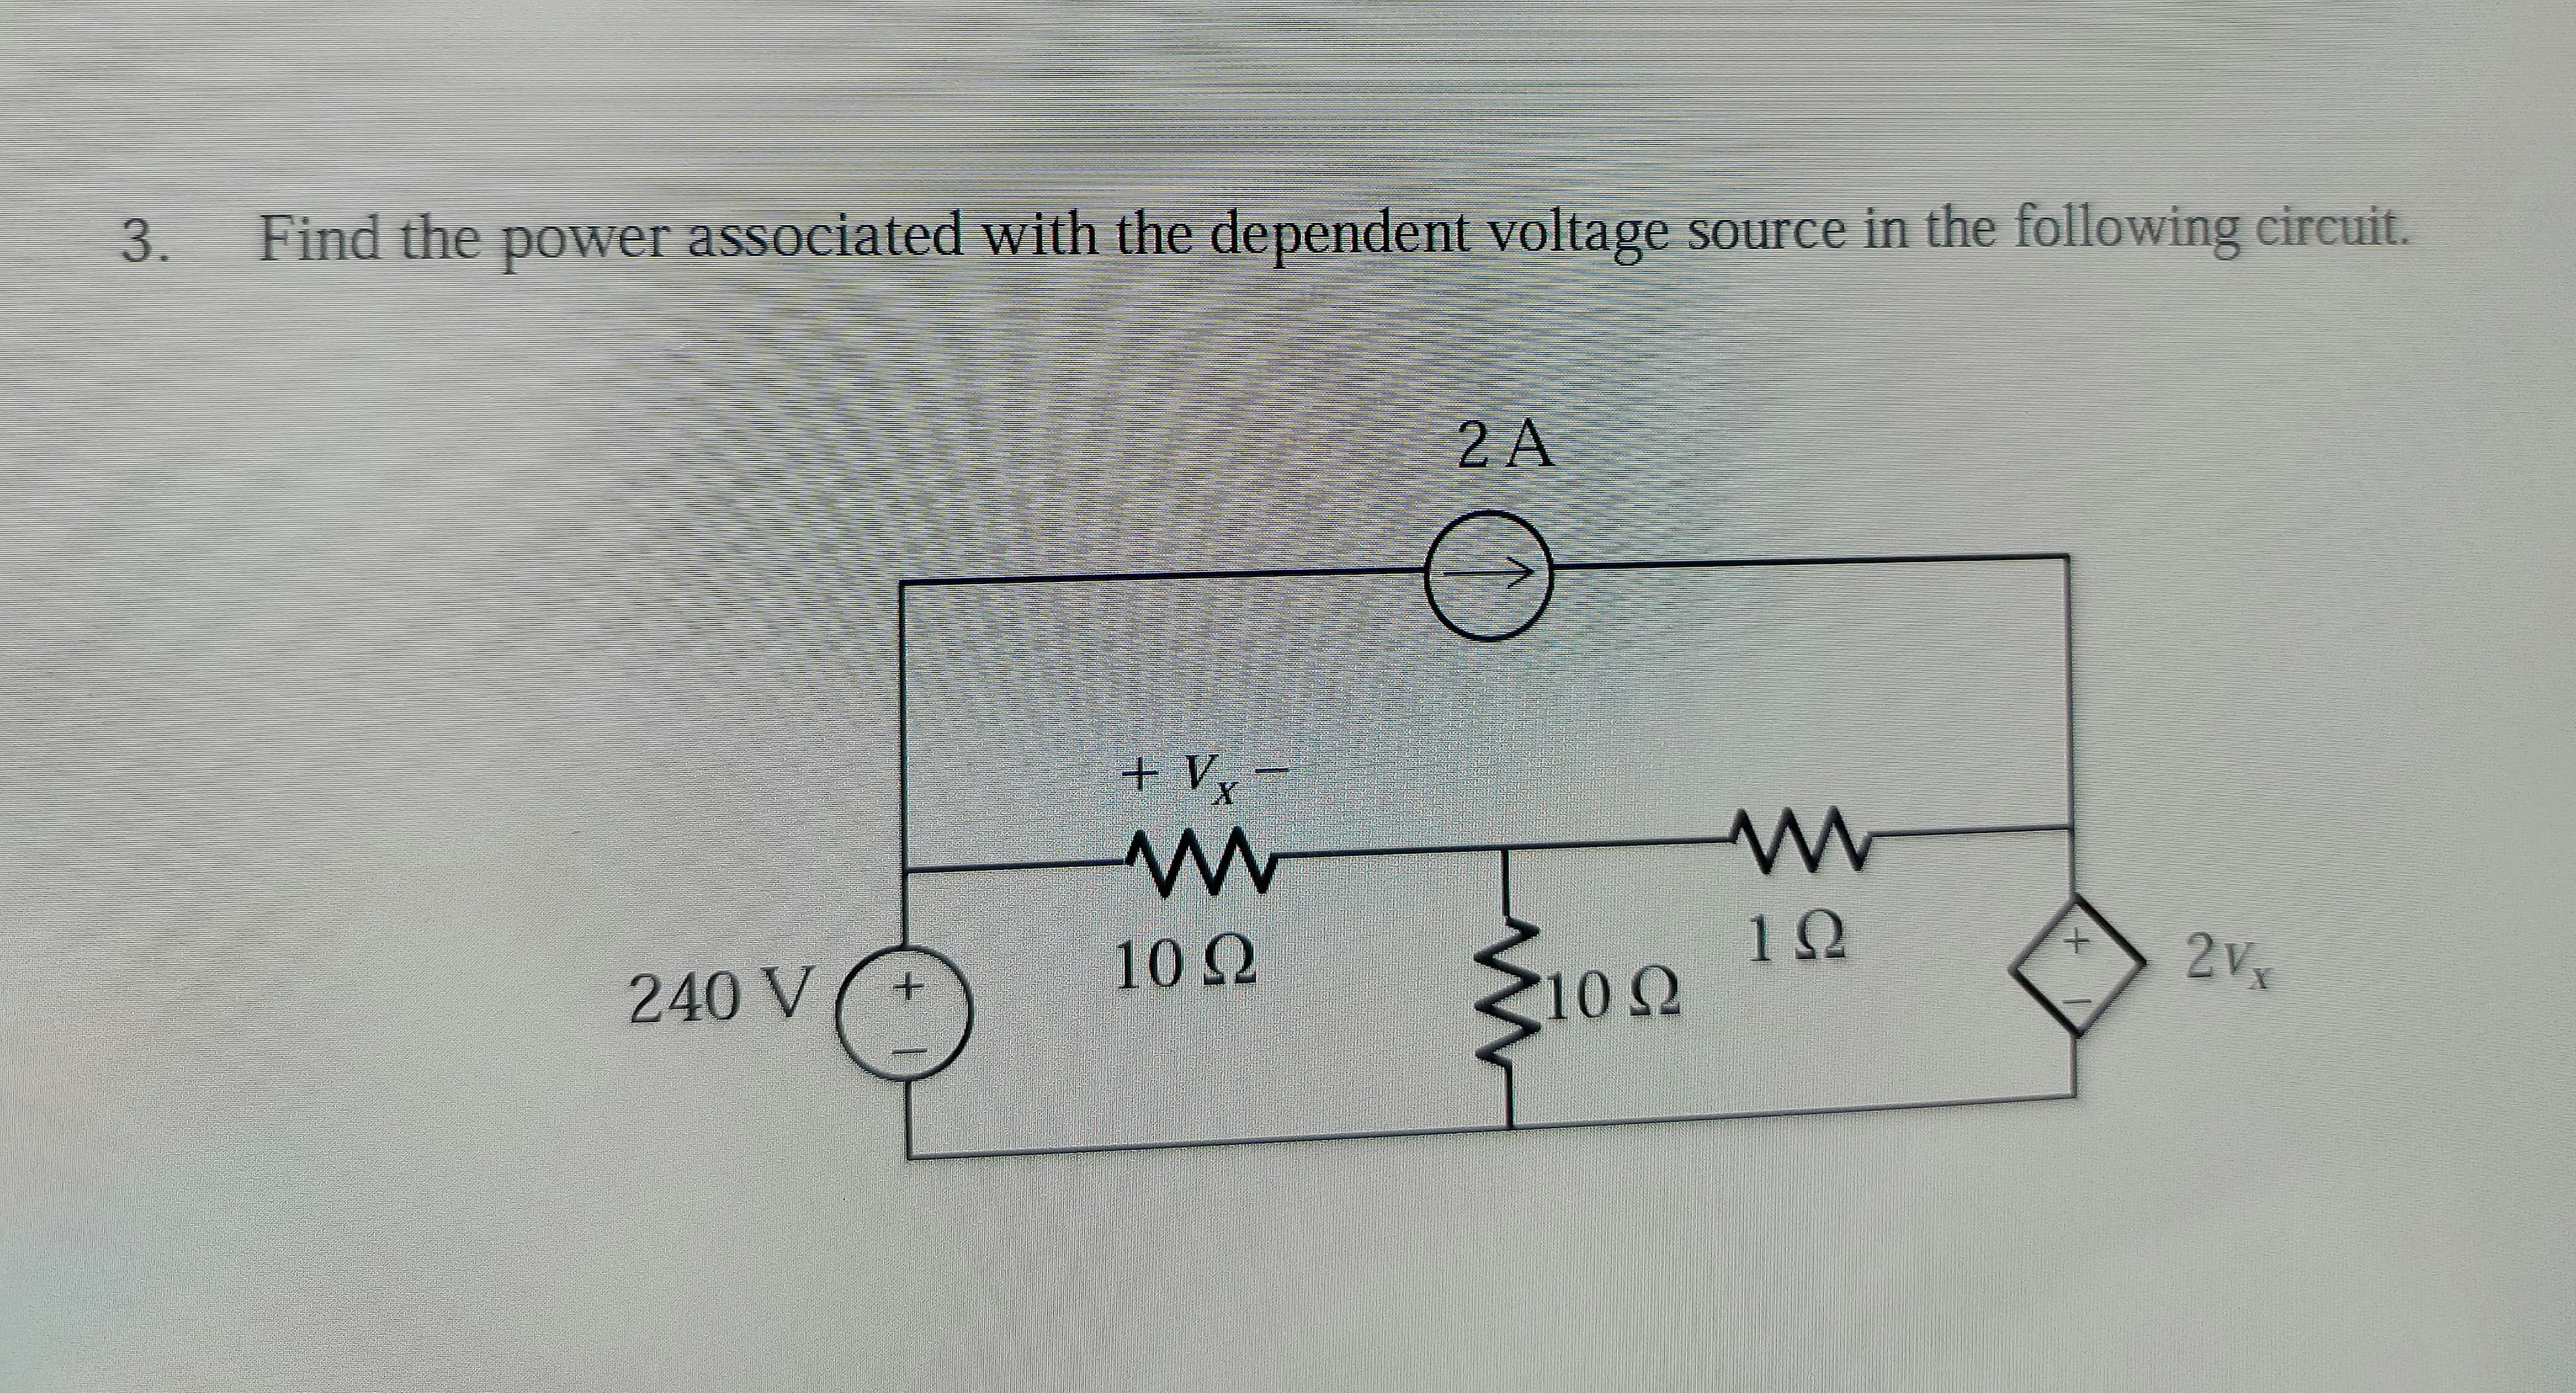 3.
Find the power associated with the dependent voltage source in the following circuit.
2 A
+V
y-
10
100
10 2
2Vx
240 V
